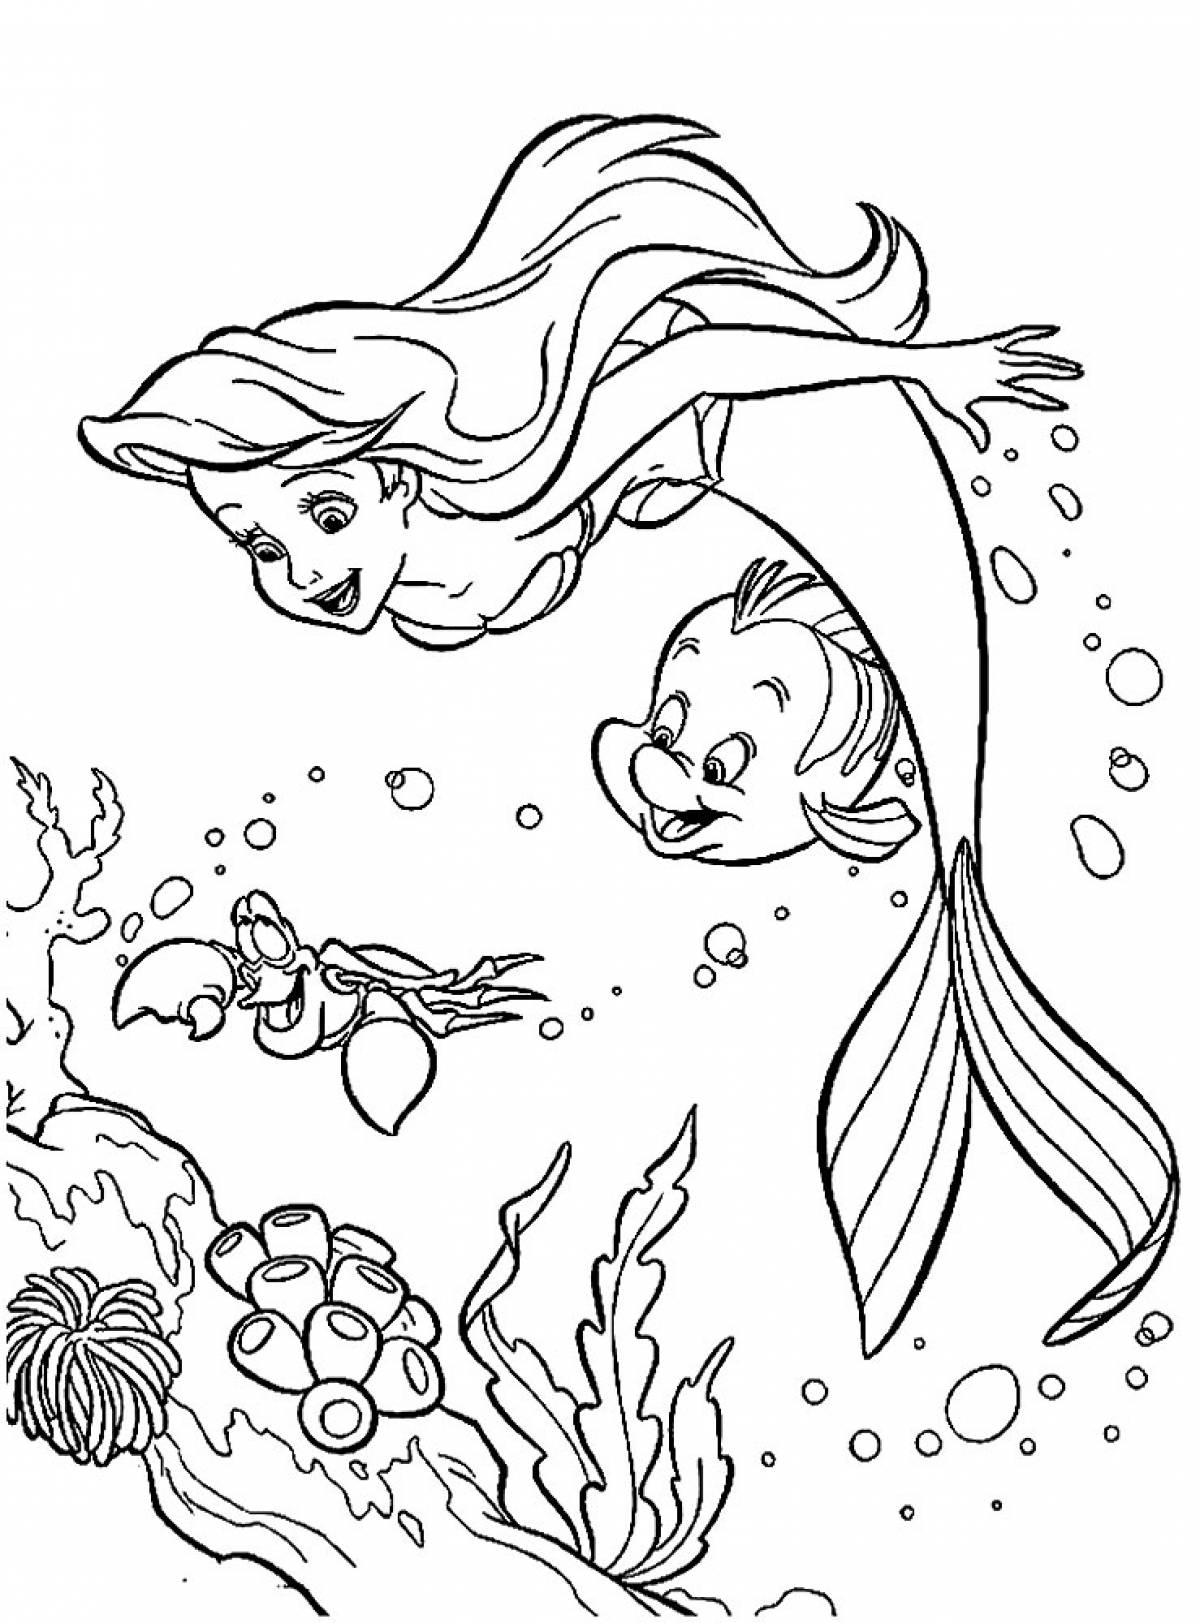 Little Mermaid coloring page